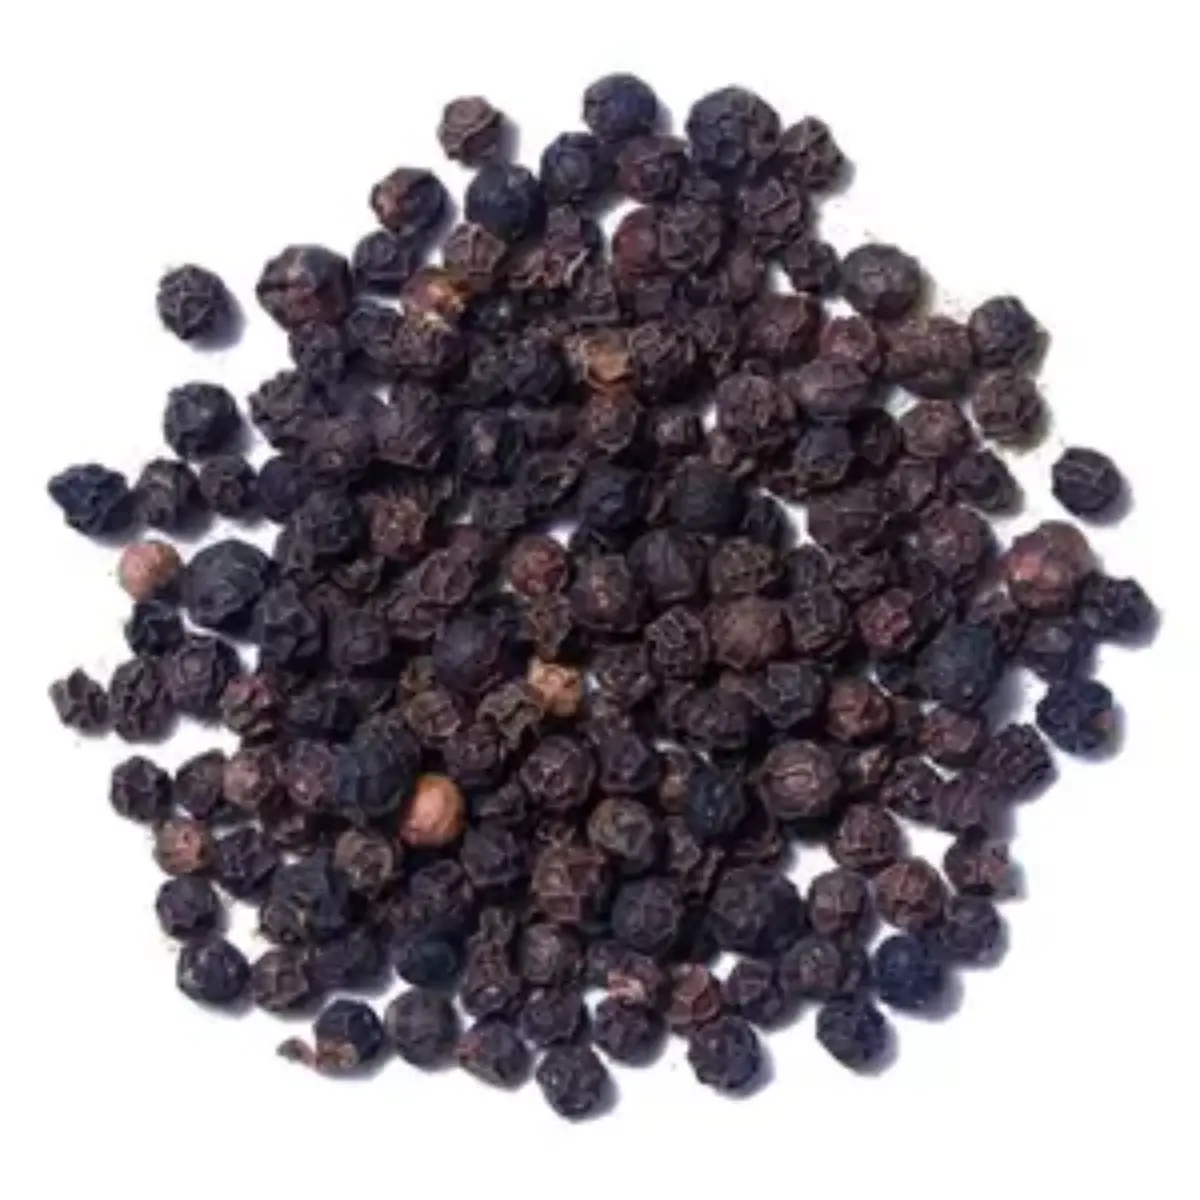 BEST SALE FACTORY FOR LOWEST PRICE AND HIGH QUALITY NEW CROP BLACK PEPPER